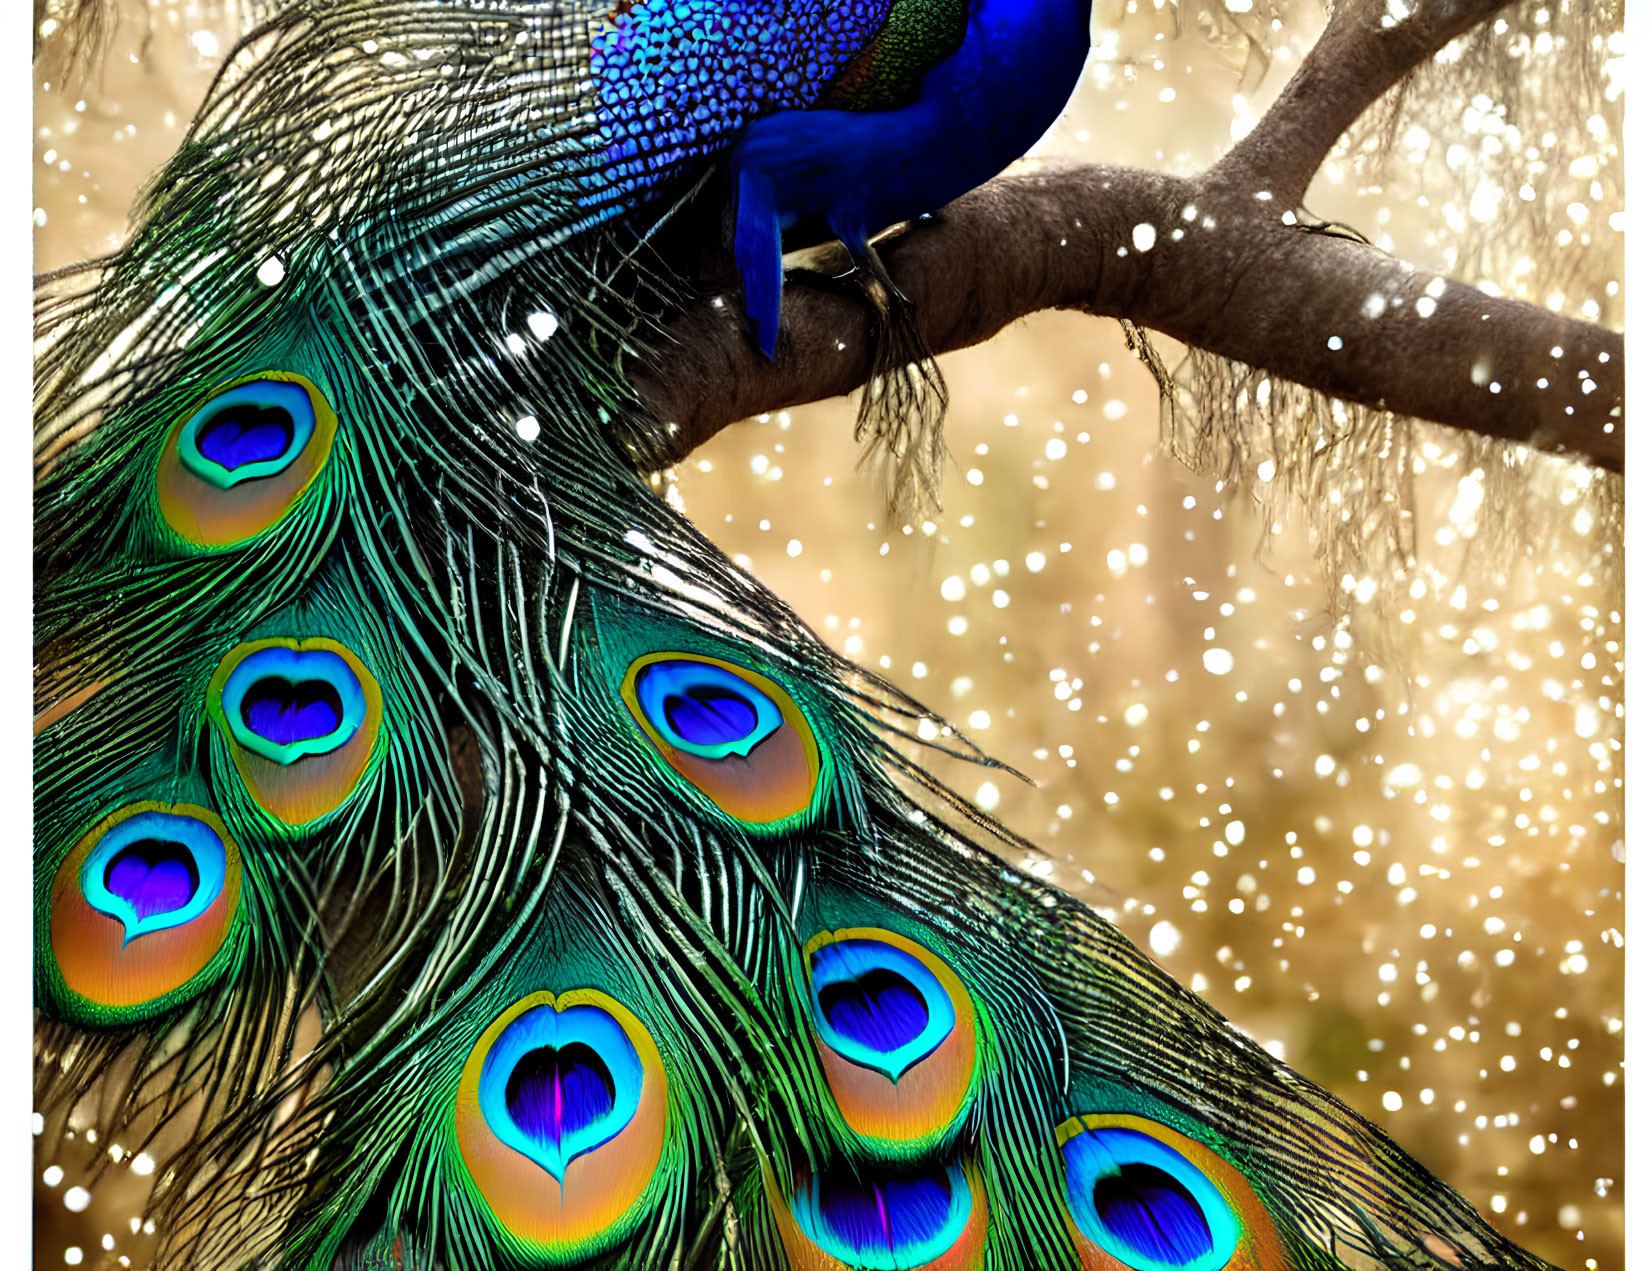 Colorful Peacock Displaying Iridescent Tail Feathers on Branch